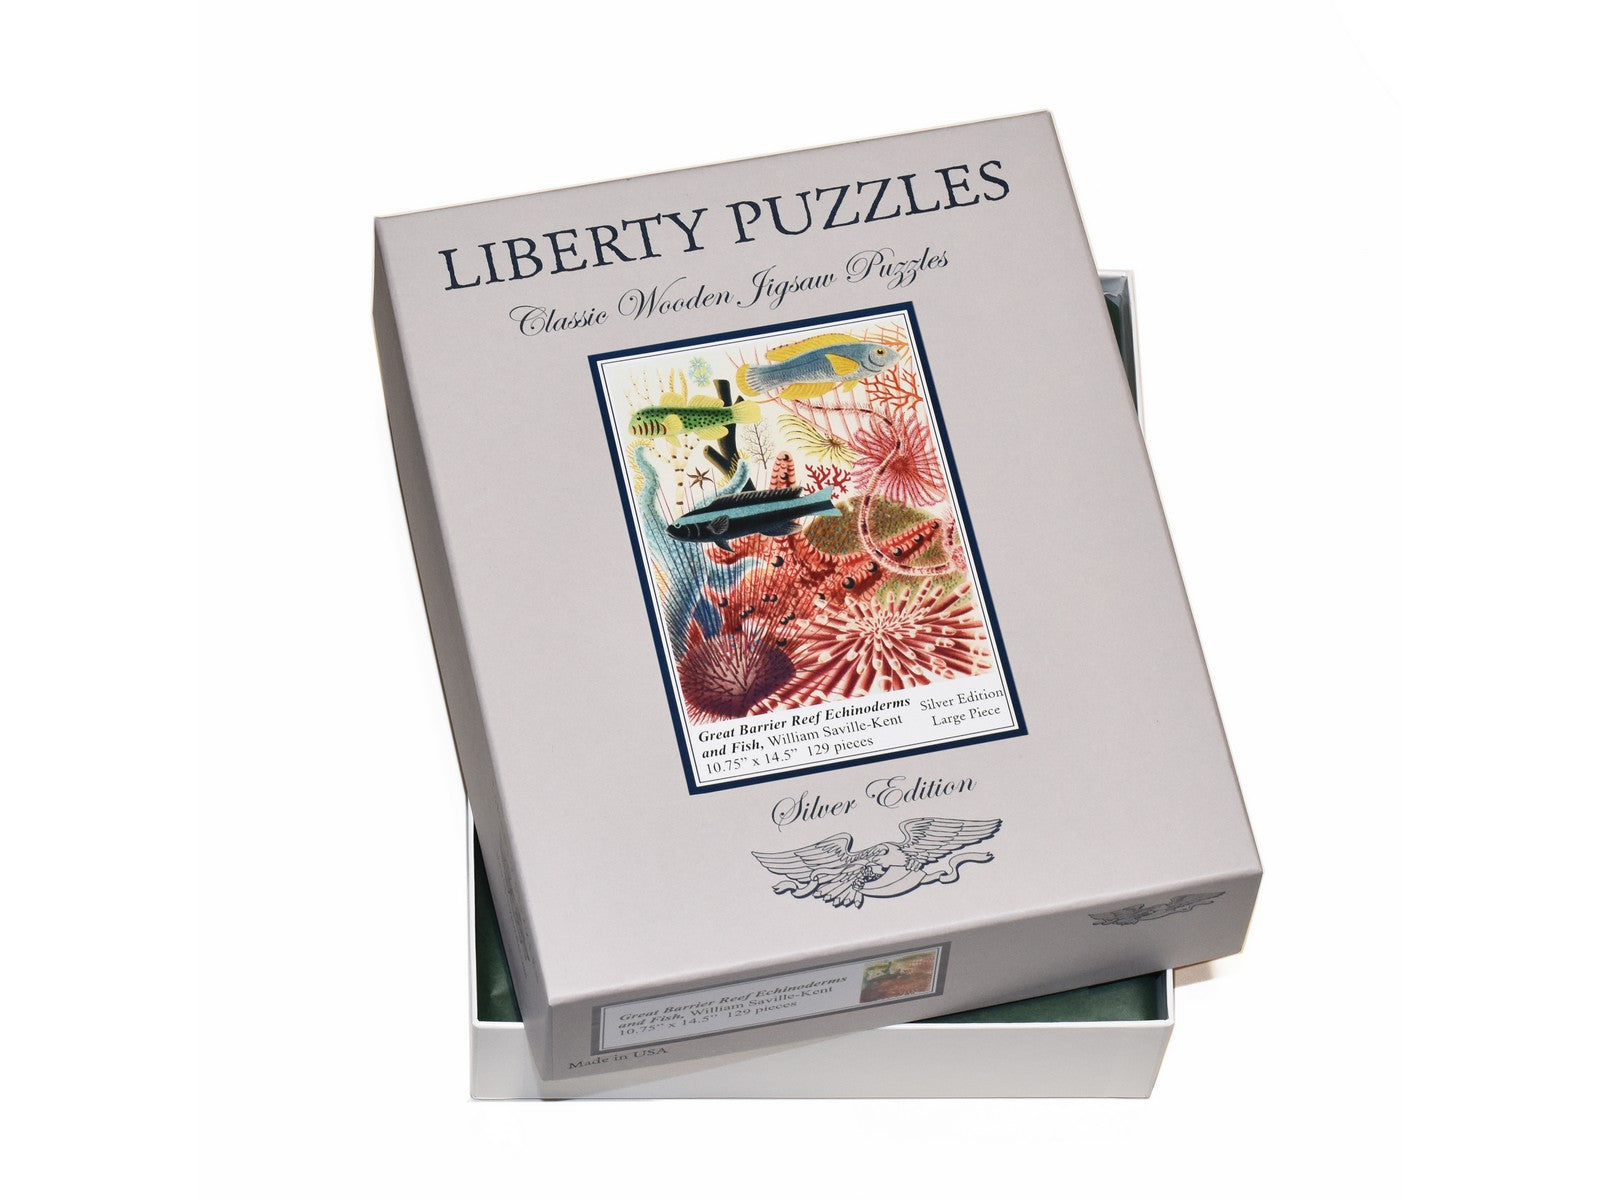 The box for the puzzle, Great Barrier Reef Echinoderms and Fish.